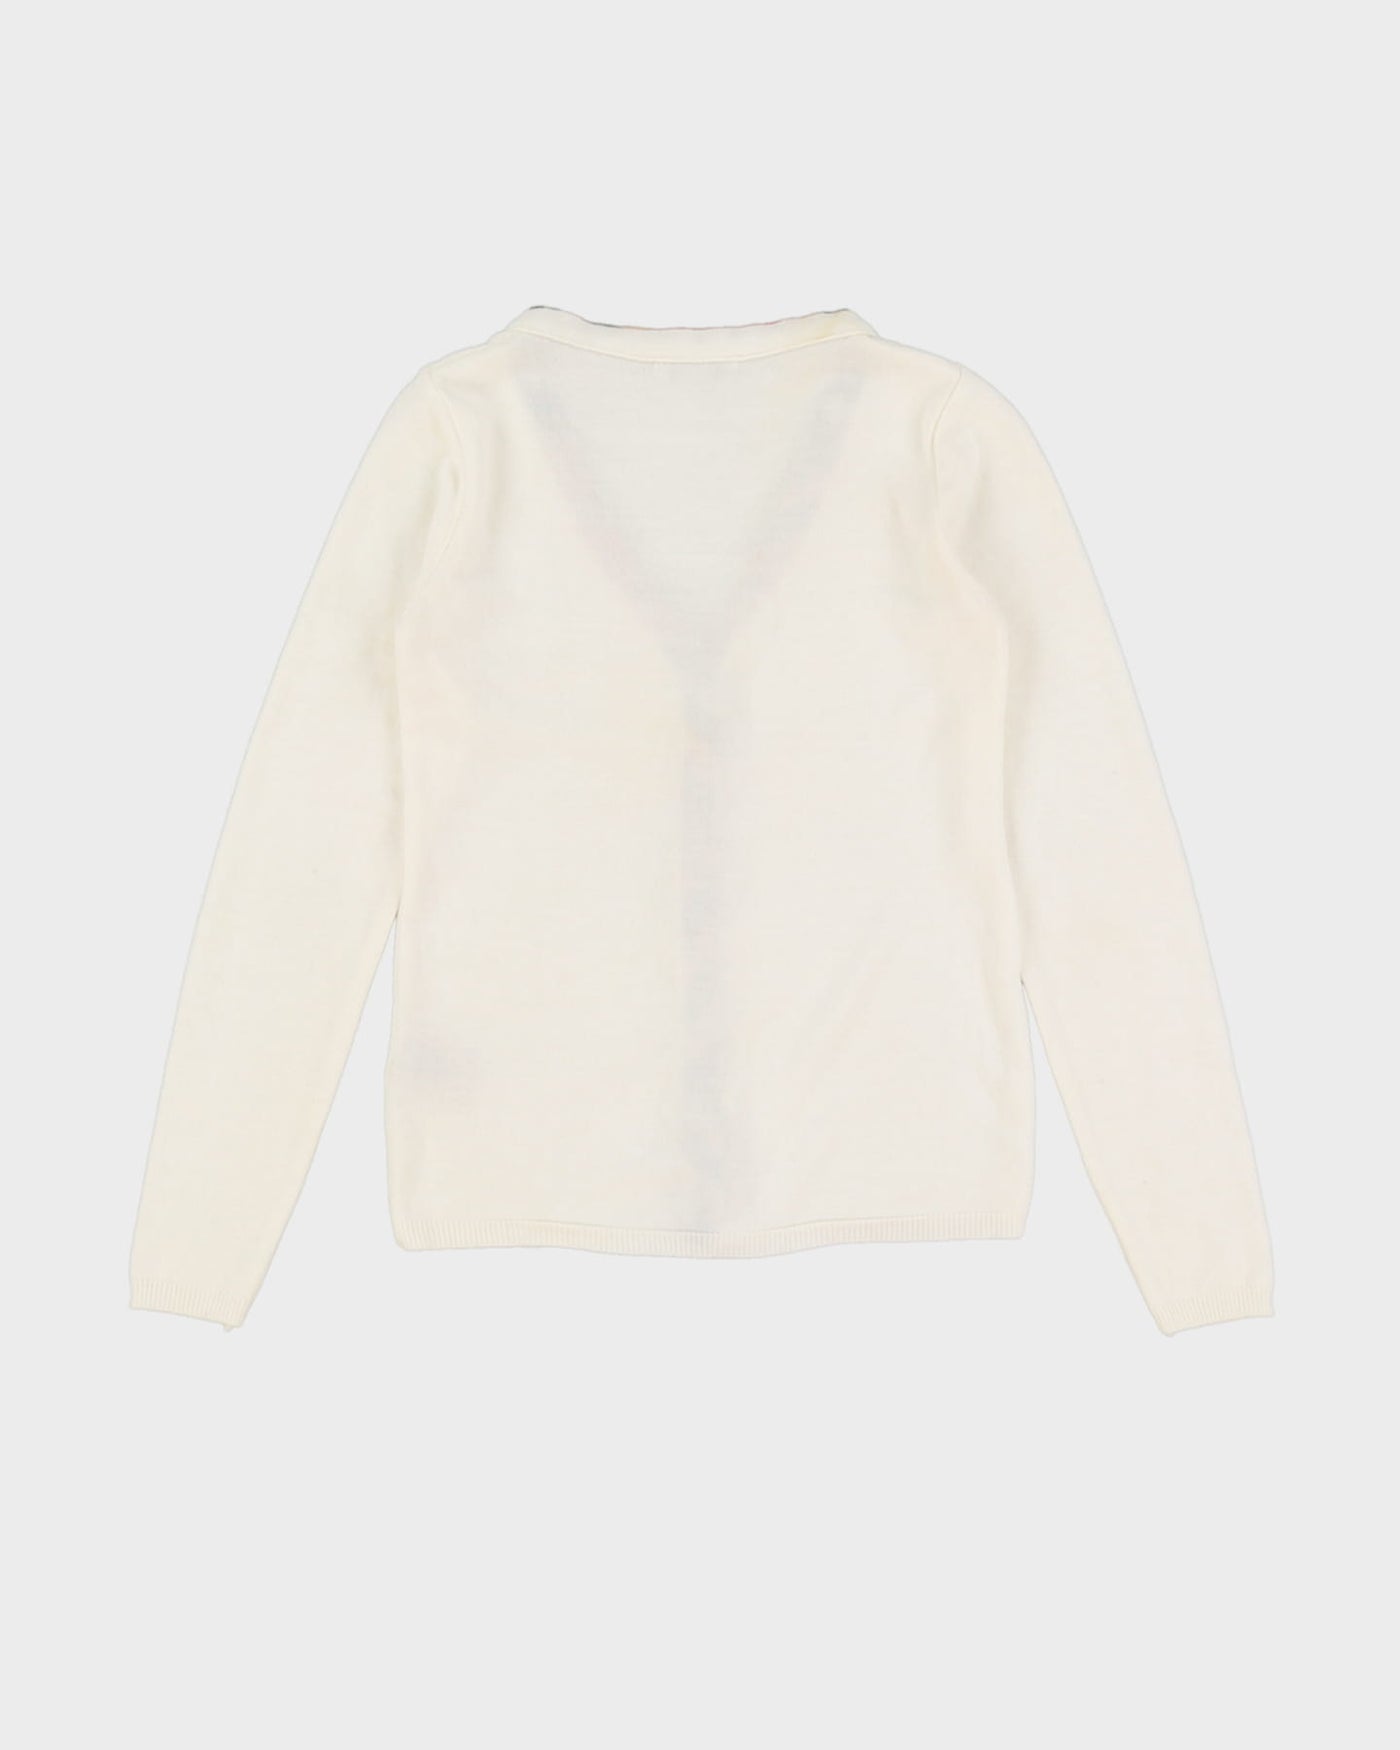 Burberry Brit White Knitted Cardigan - XS